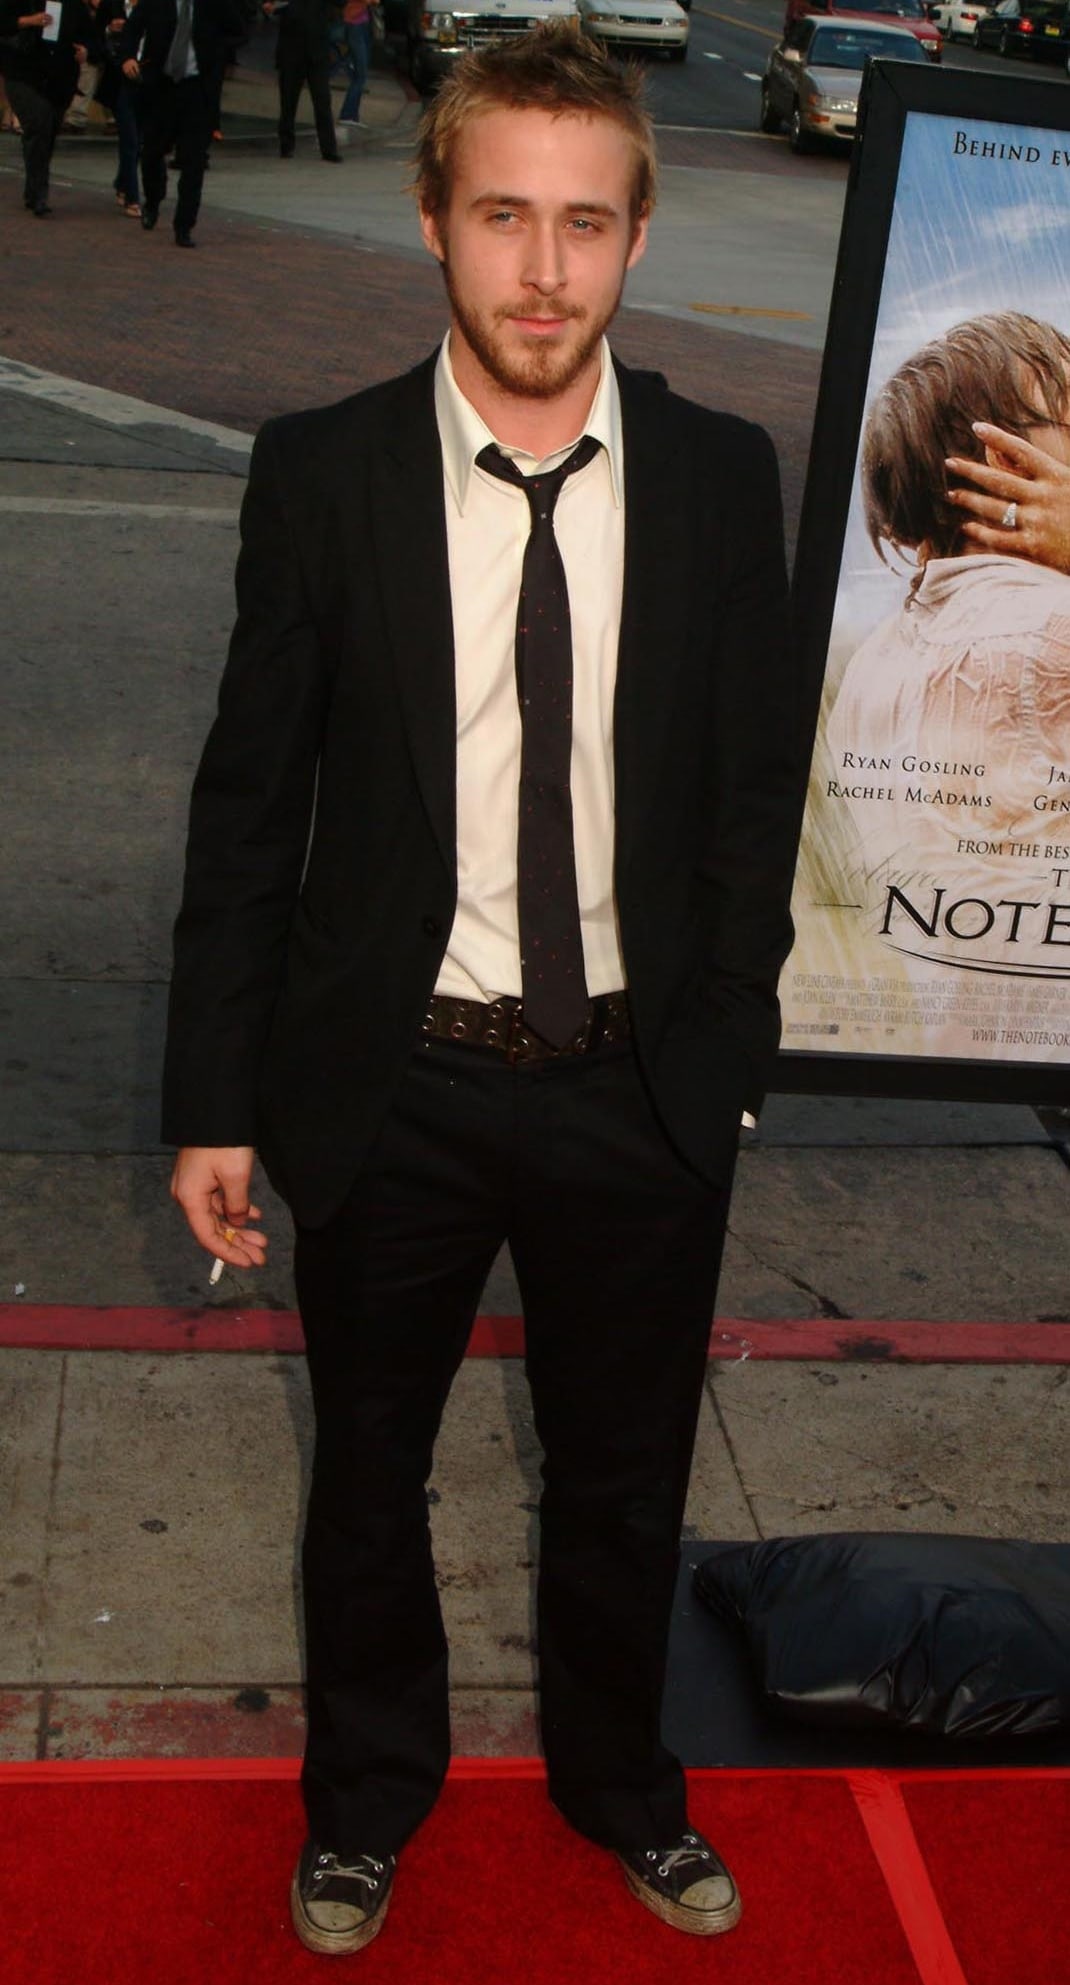 Ryan Gosling smoking at the premiere of The Notebook